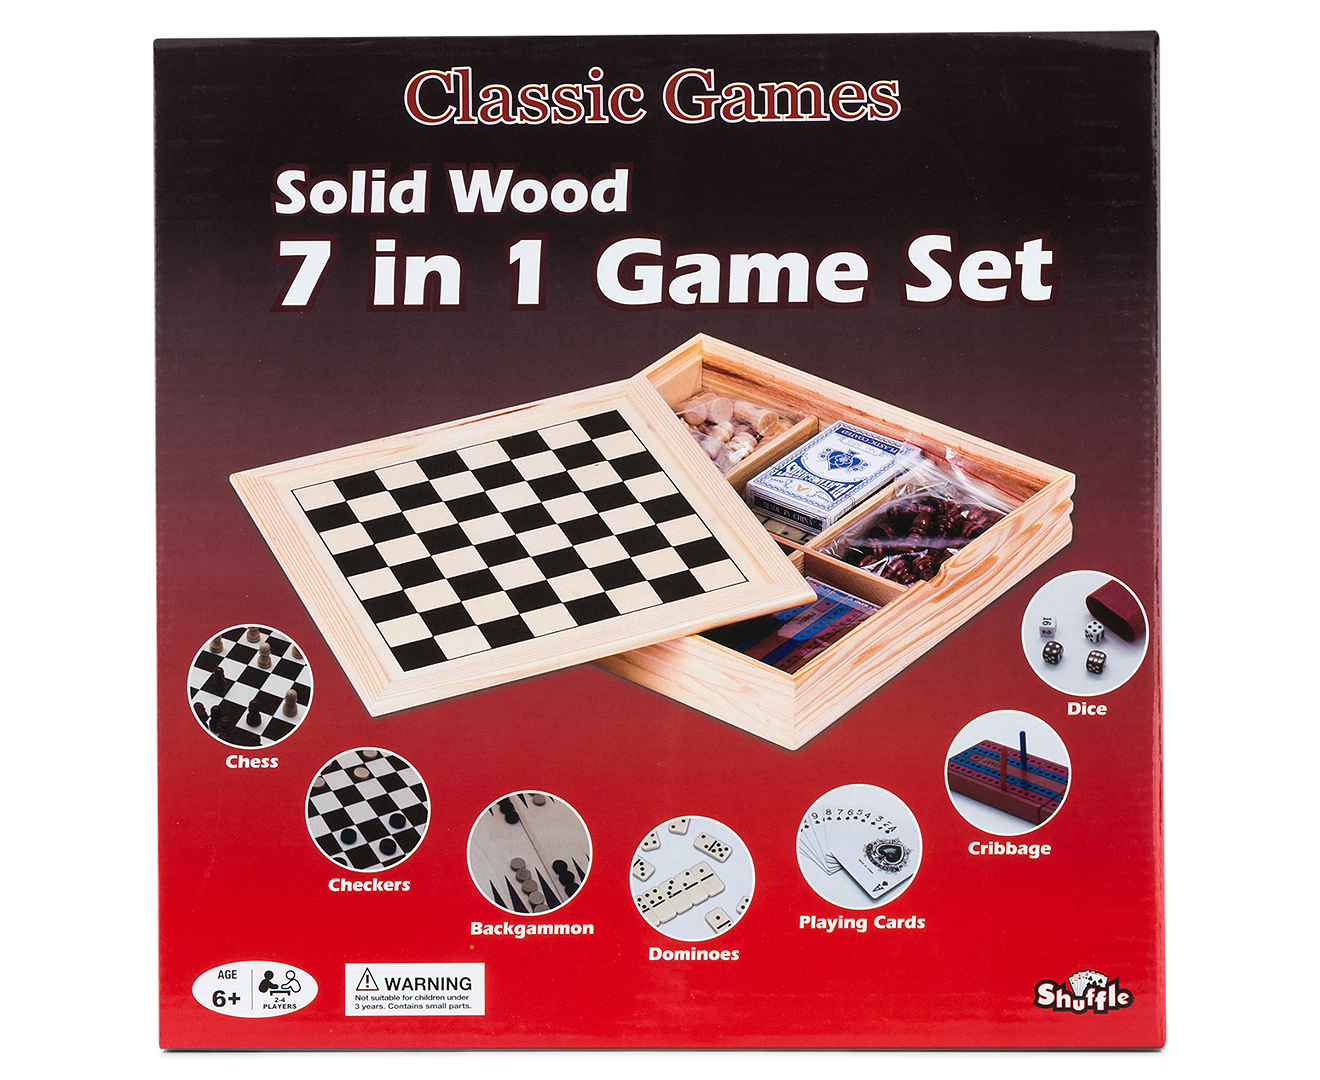 Shuffle Classic Games Solid Wood 7-in-1 Game Set | Www.catch.com.au